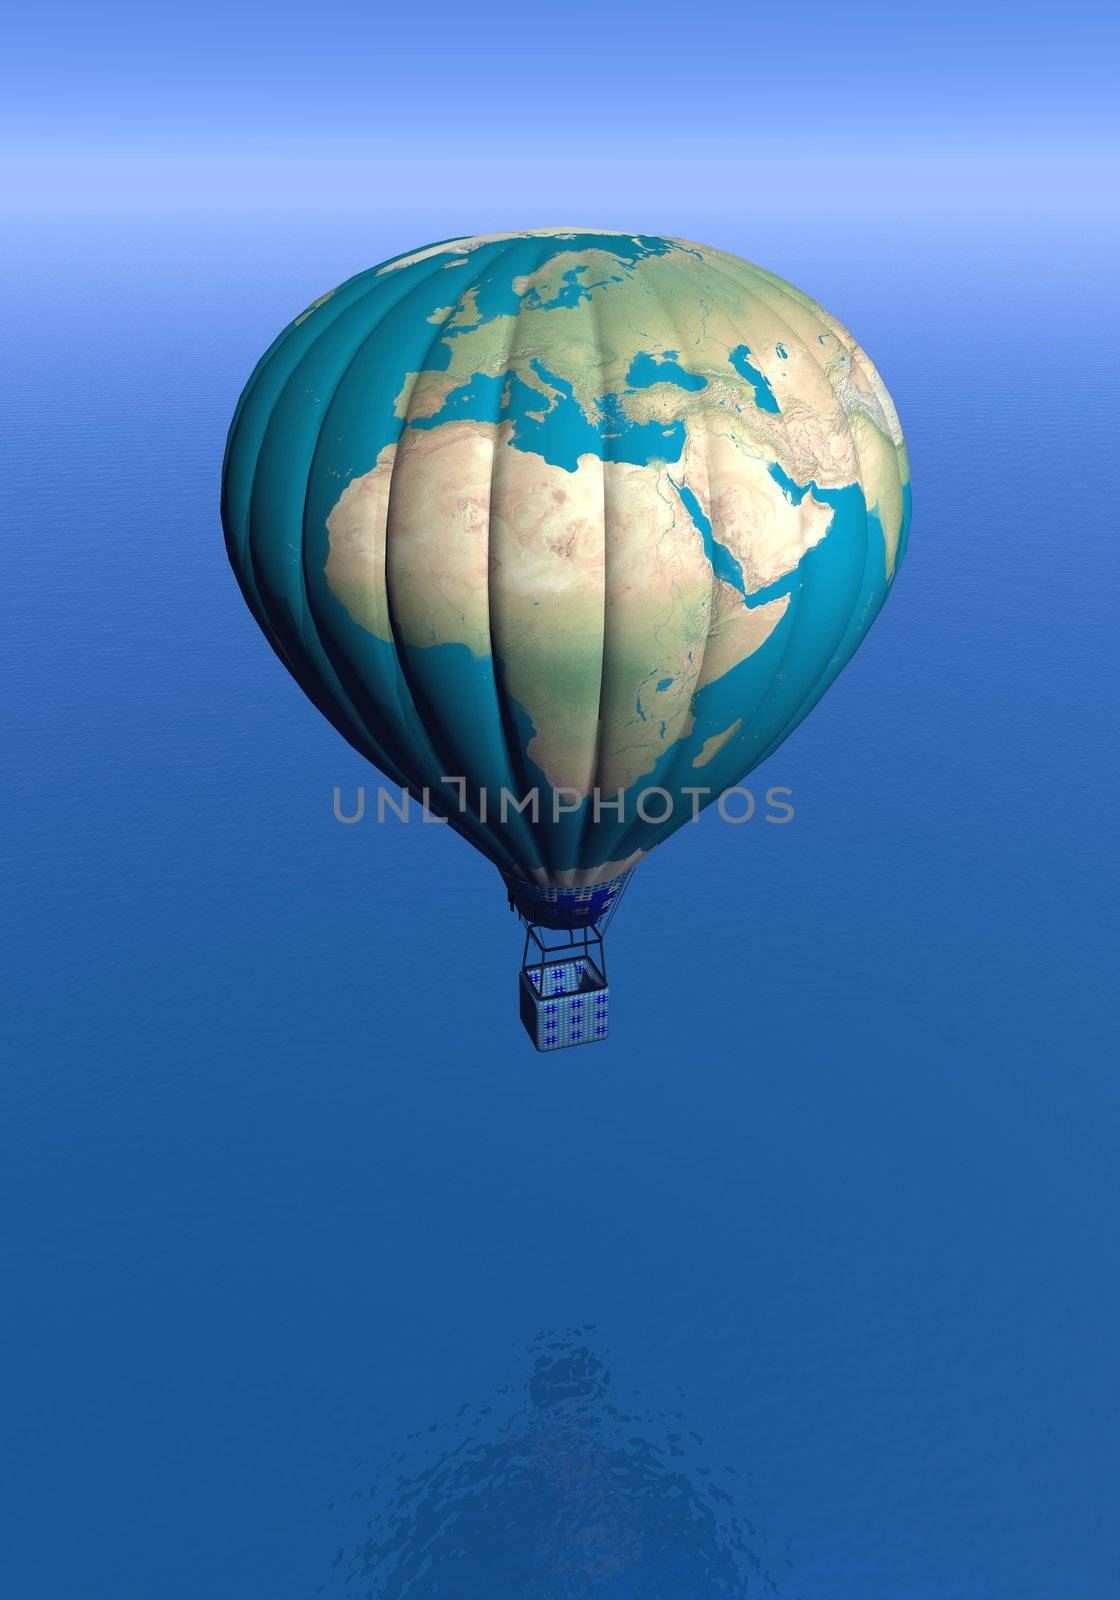 One hot air balloon with earth map flying in the blue sky and upon the ocean